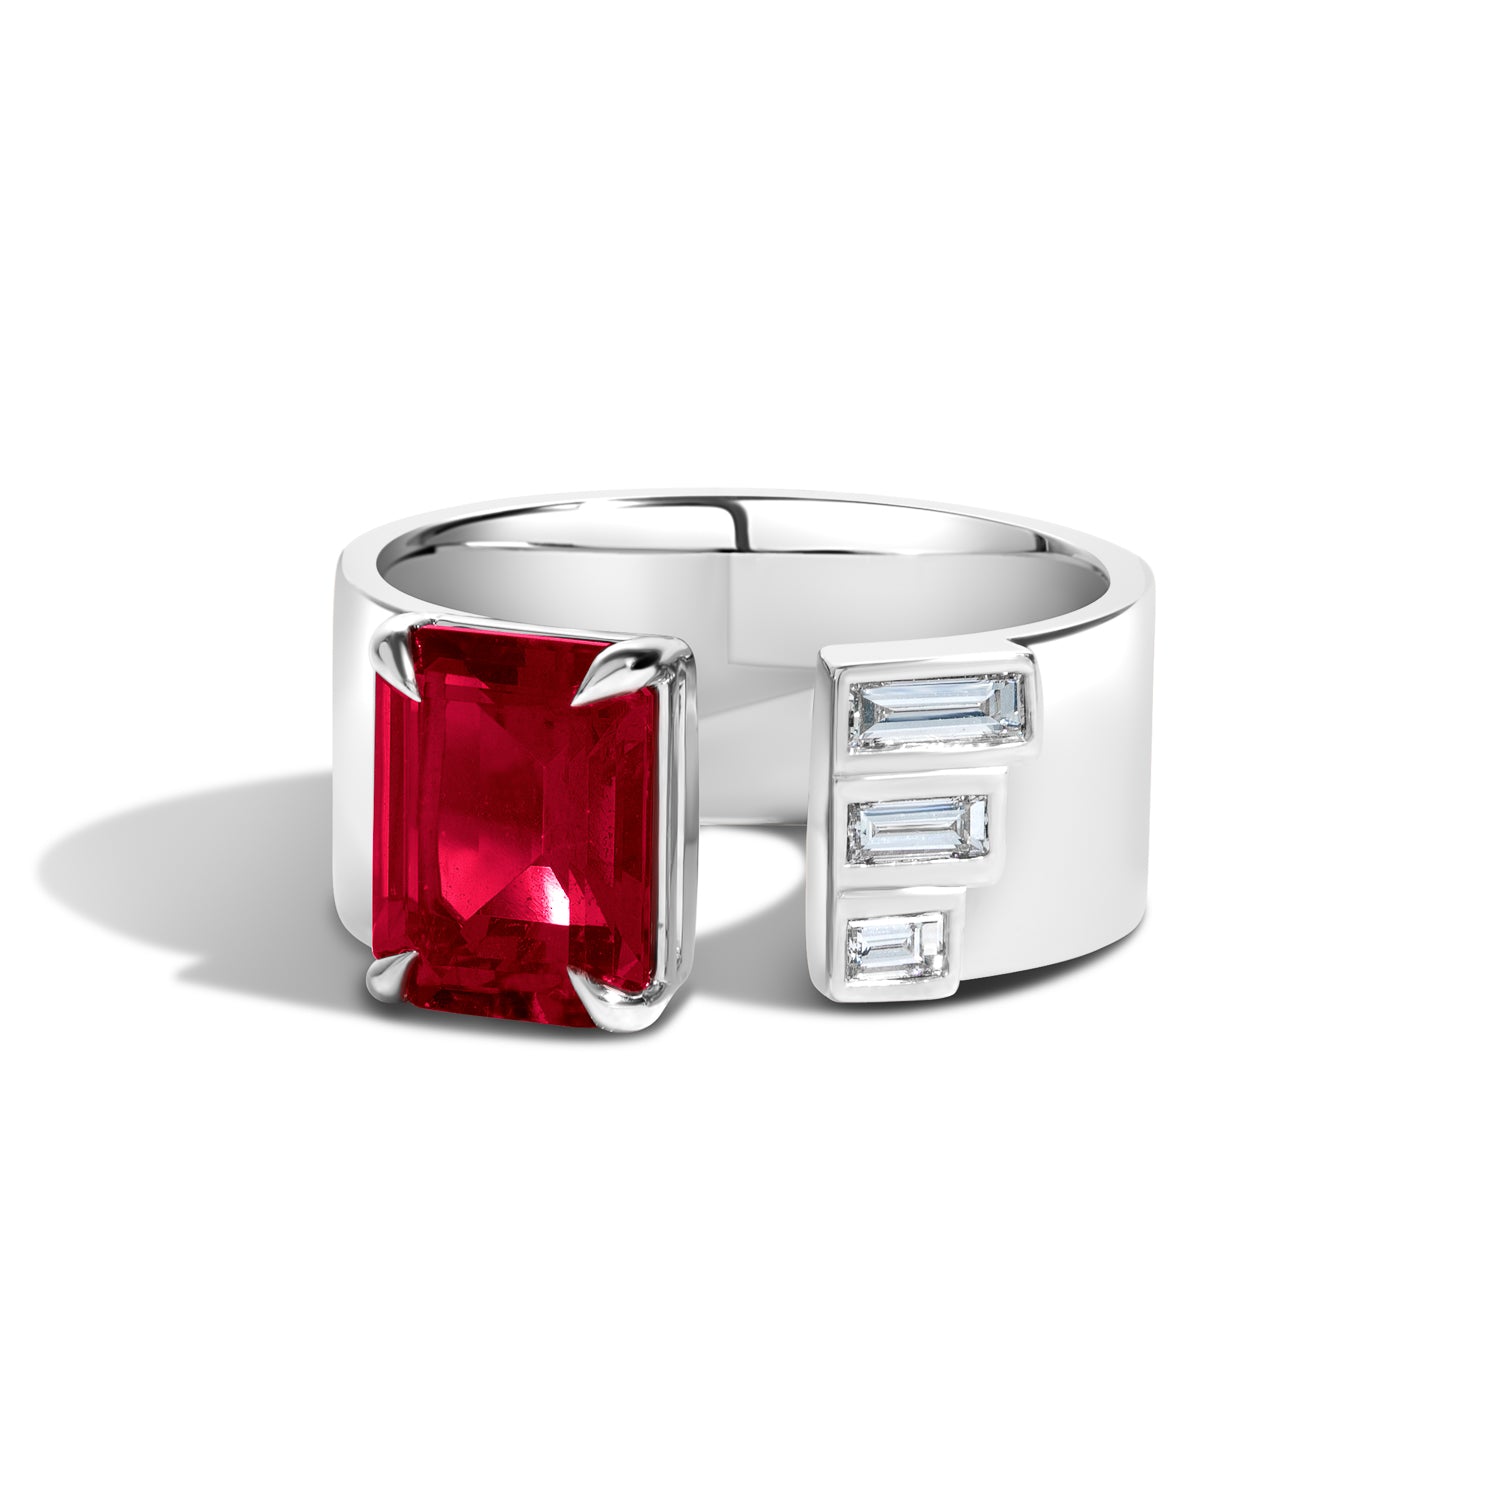 Shahla Karimi Jewelry Ruby Gap Band w/ Baguettes 14K White Gold or Platinum